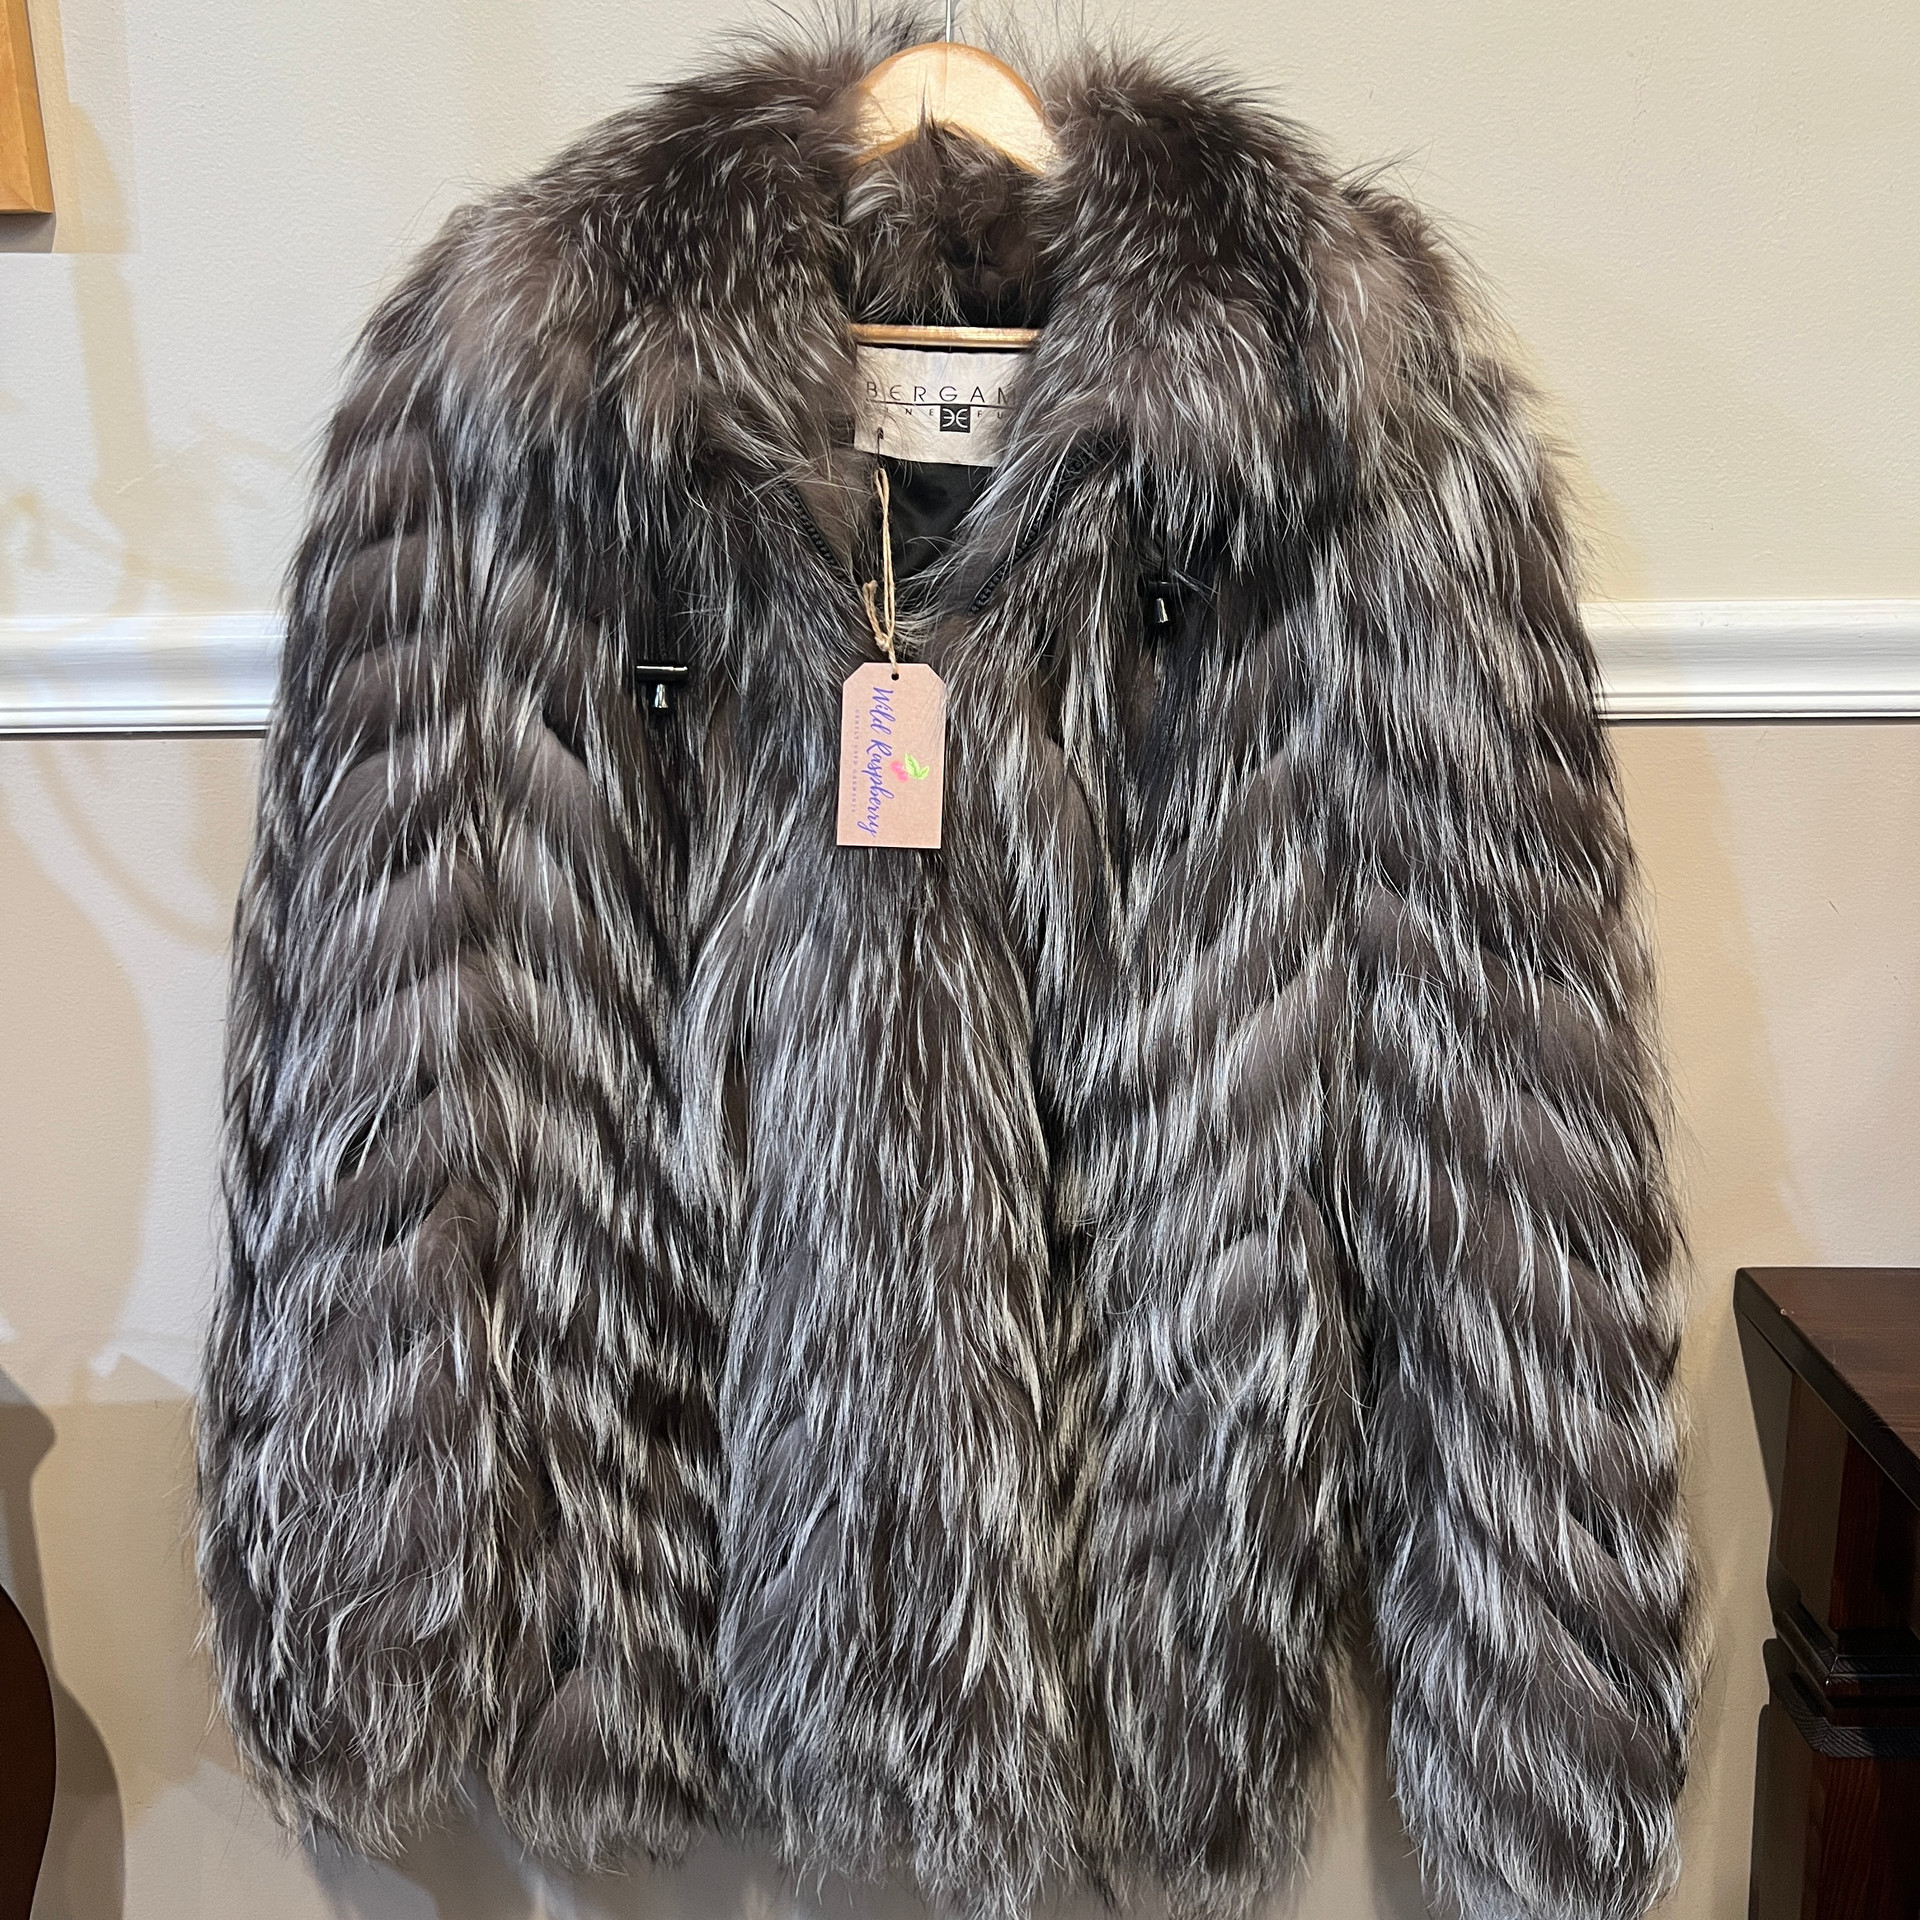 Bergama Fine Furs Products - Wild Raspberry Resale Boutique and Warehouse